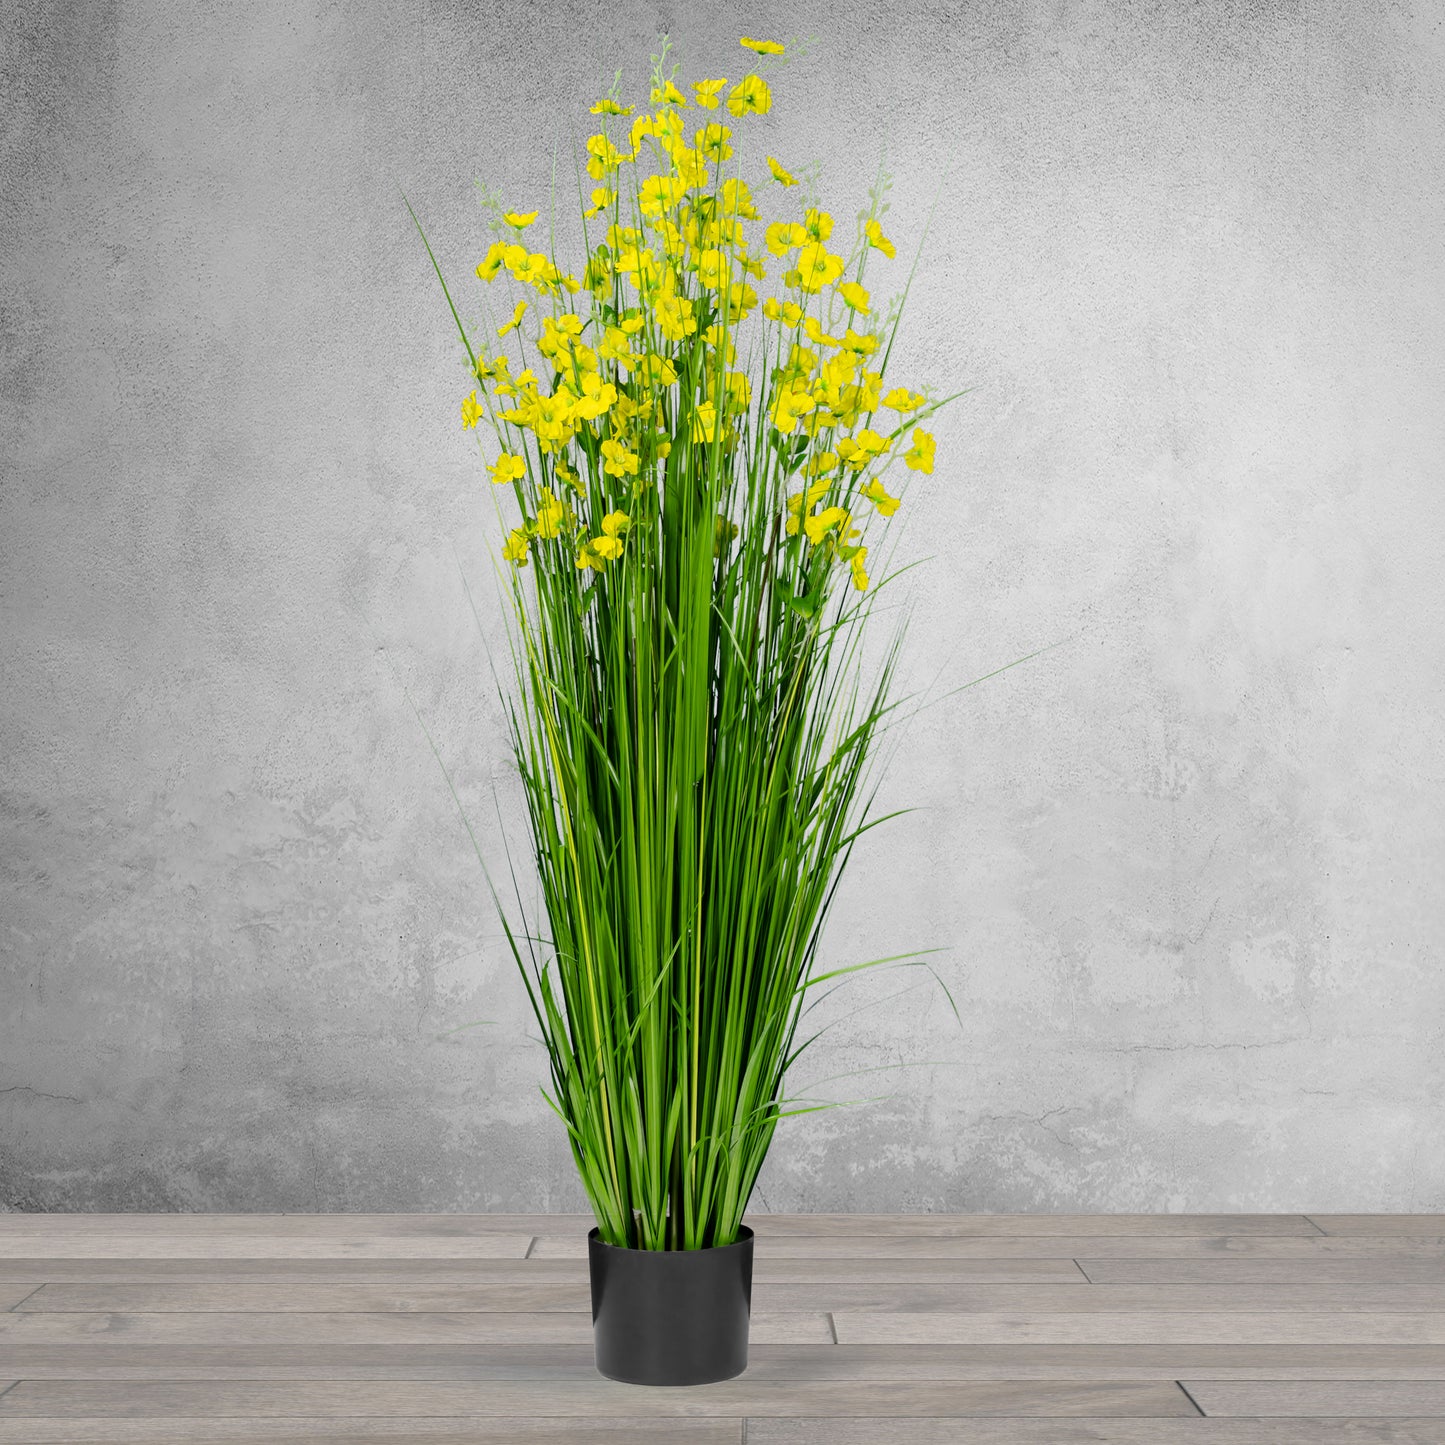 5 Feet High Artificial with Decorative Yellow Flowers